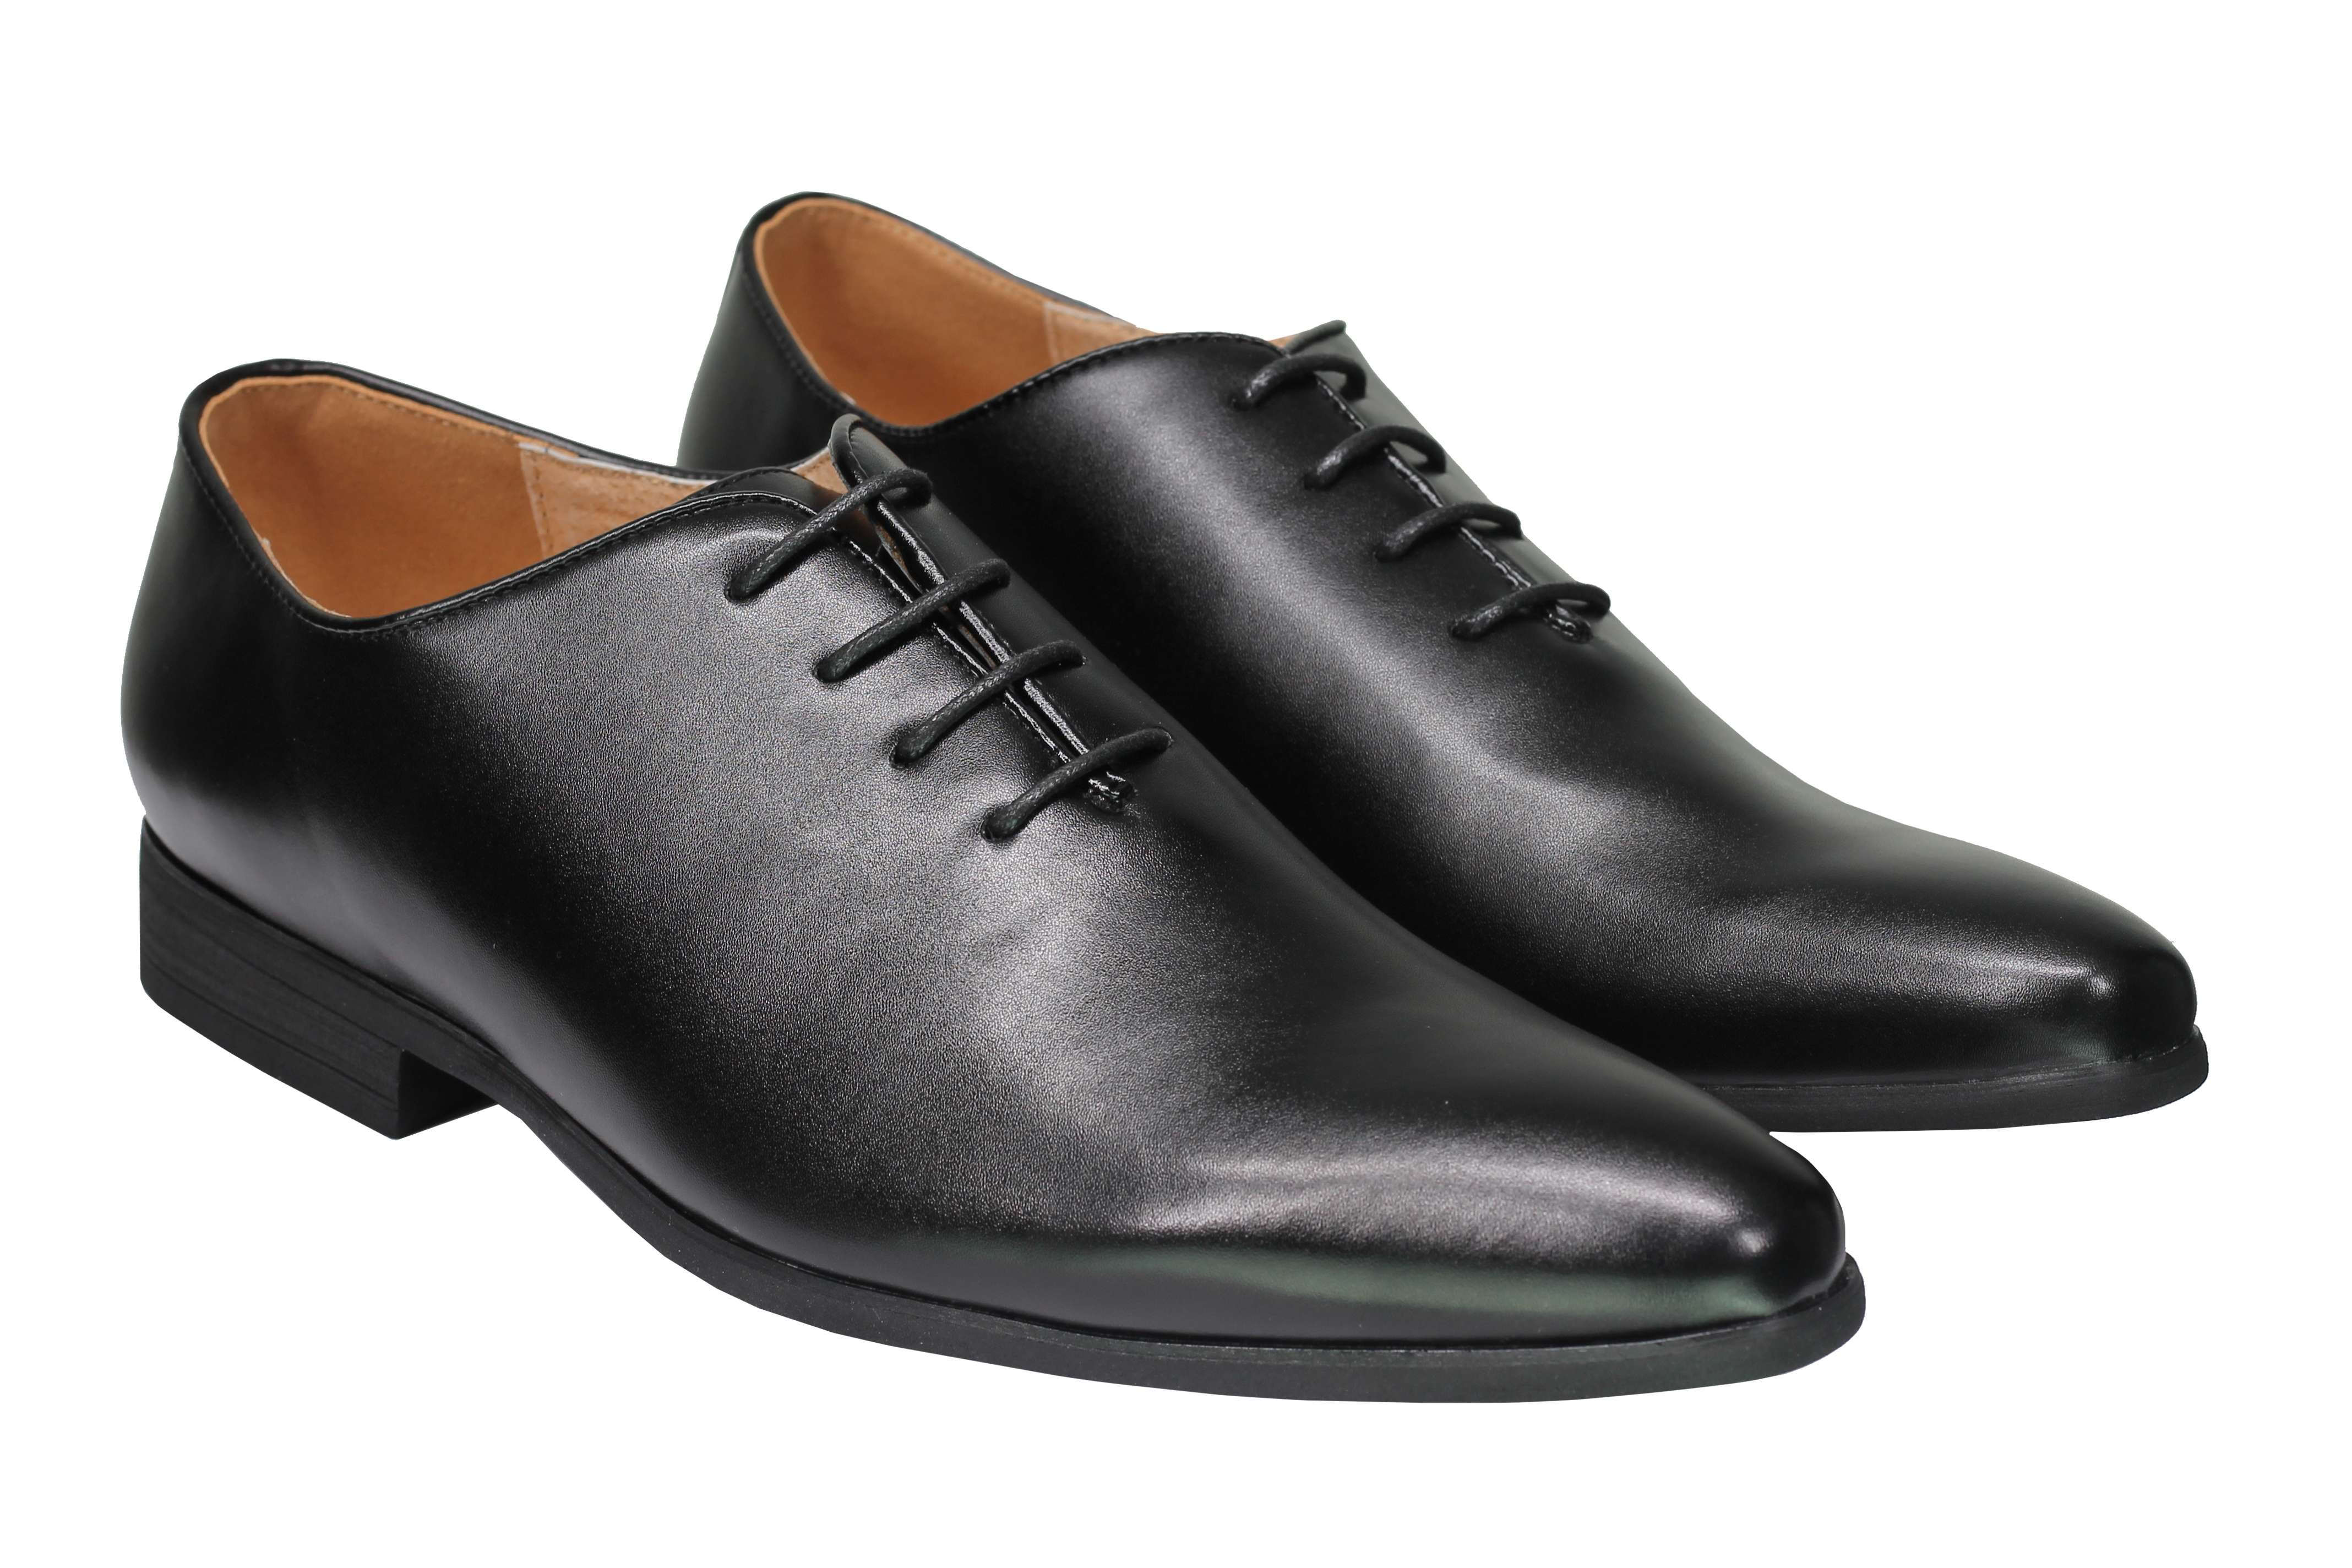 Faux Leather Upper Wholecut Oxford Shoes